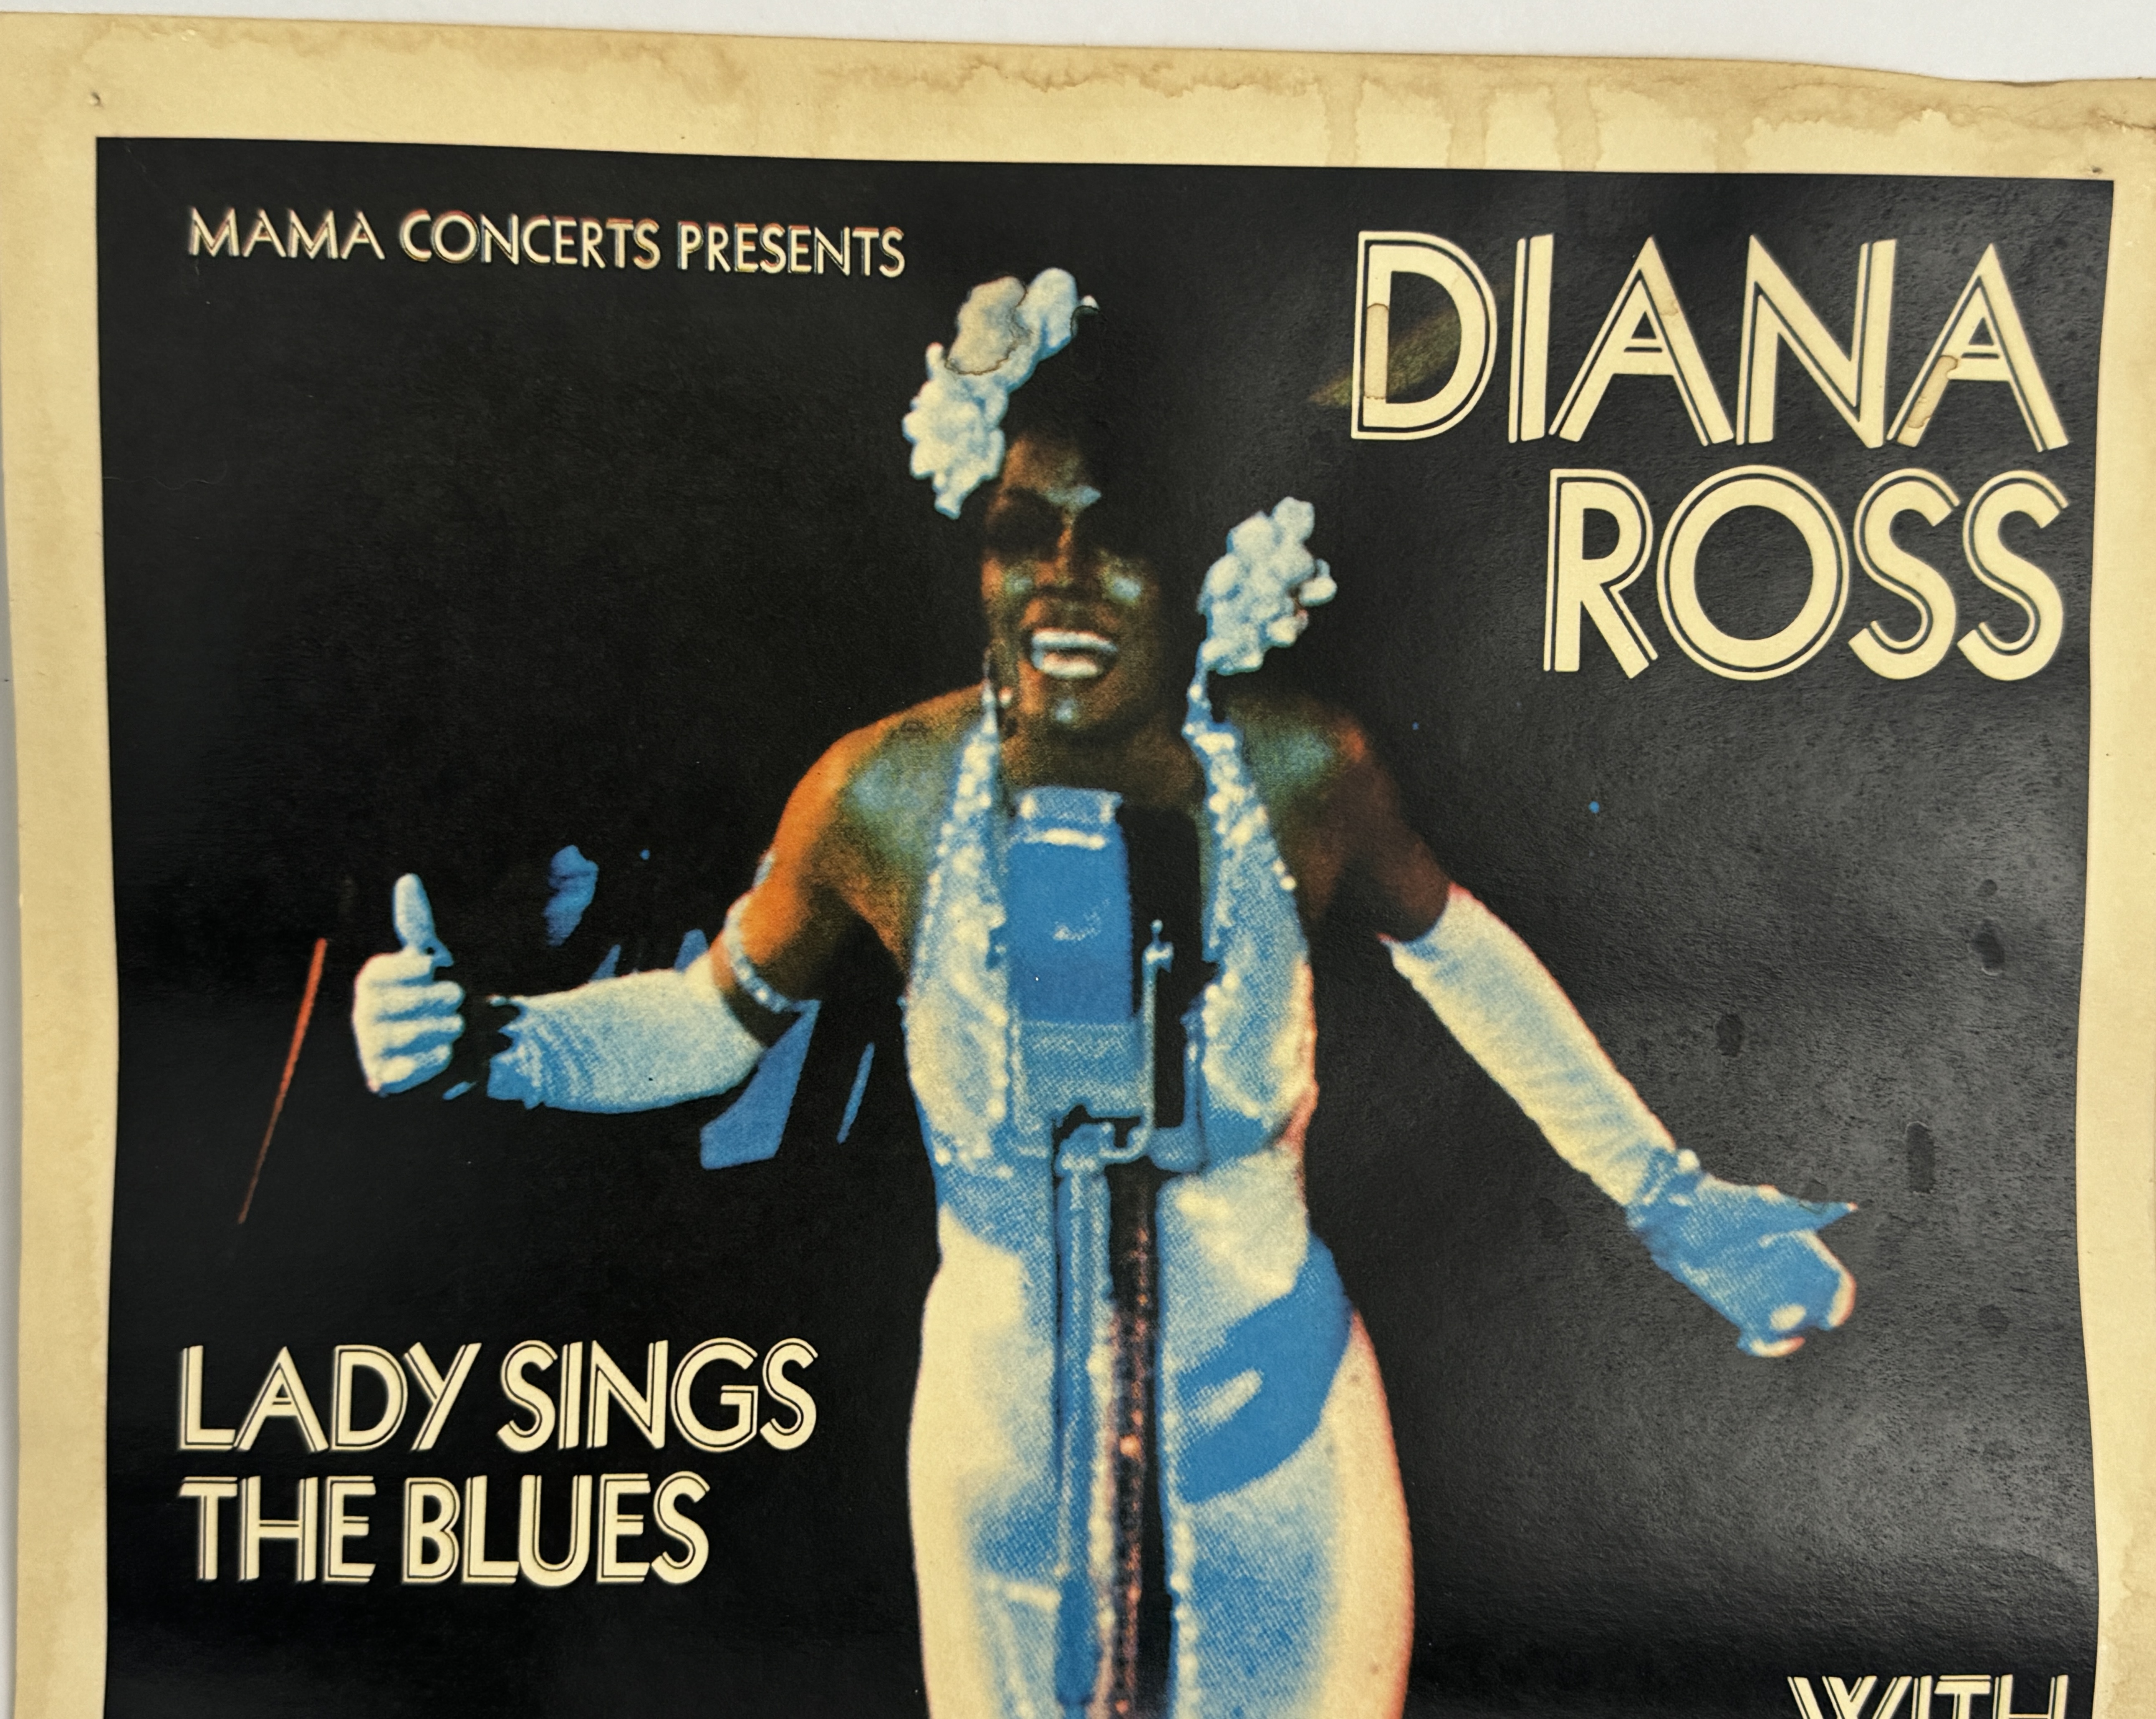 Diana Ross Mama Concert Poster - Image 3 of 4